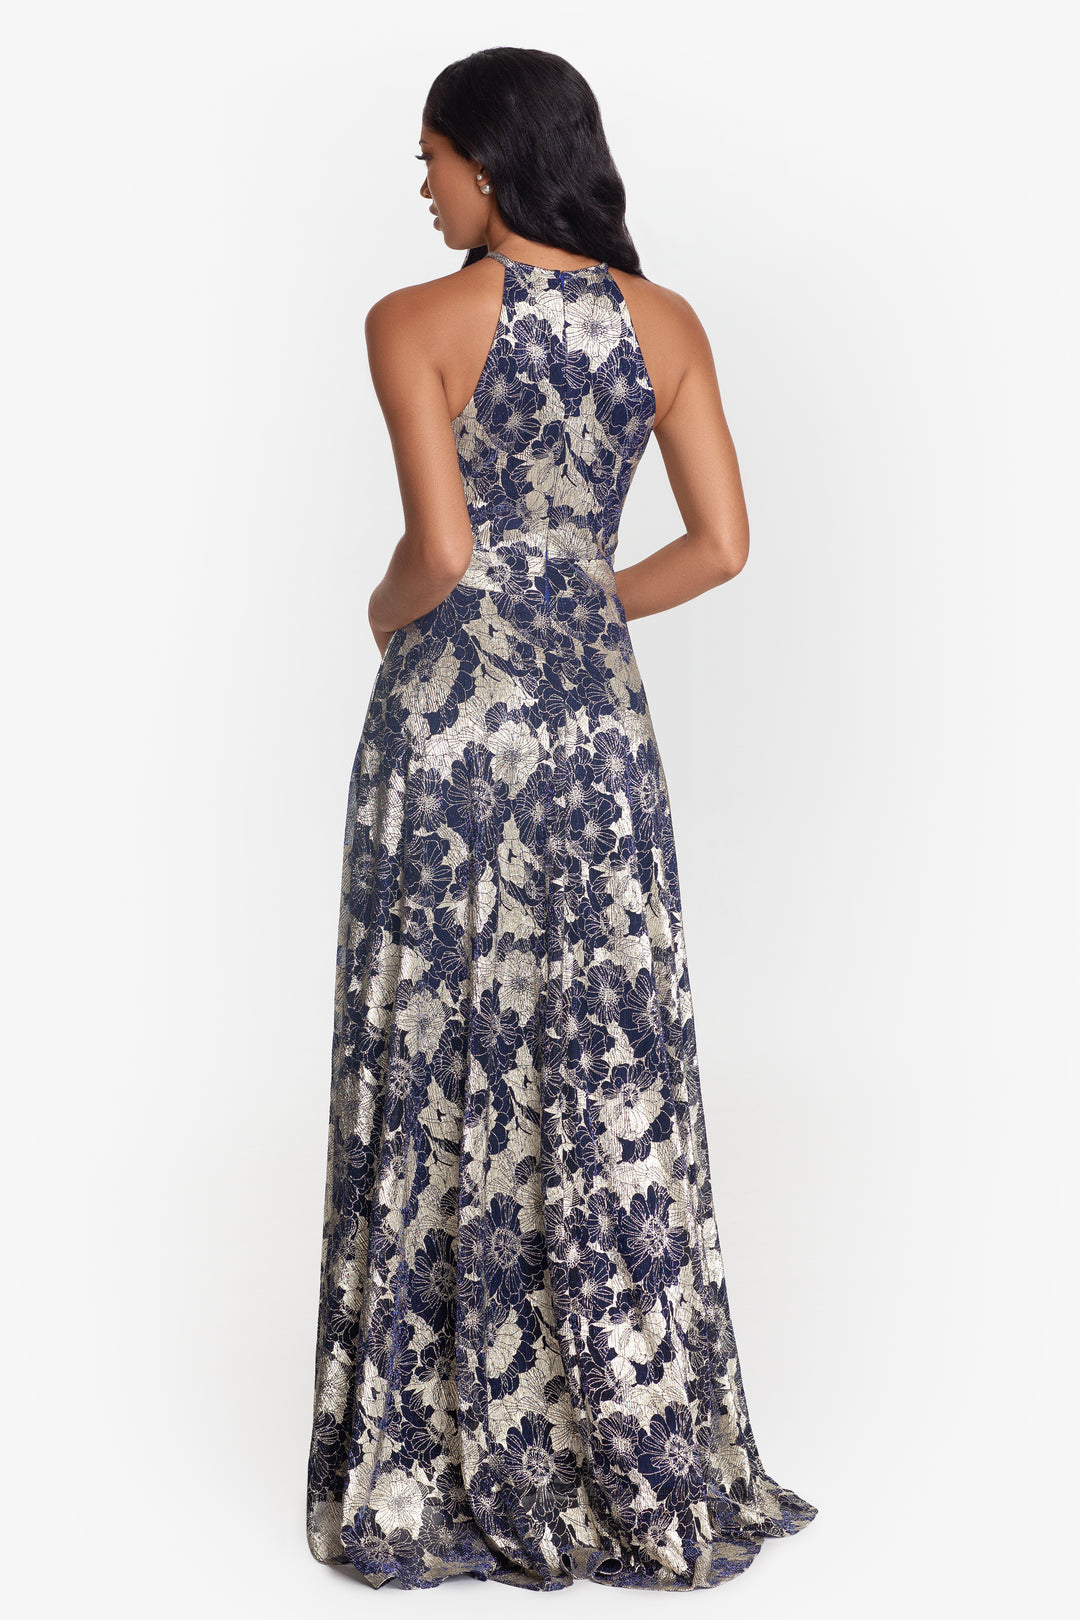 Overall Lacy Front Open Gimp Long Gown